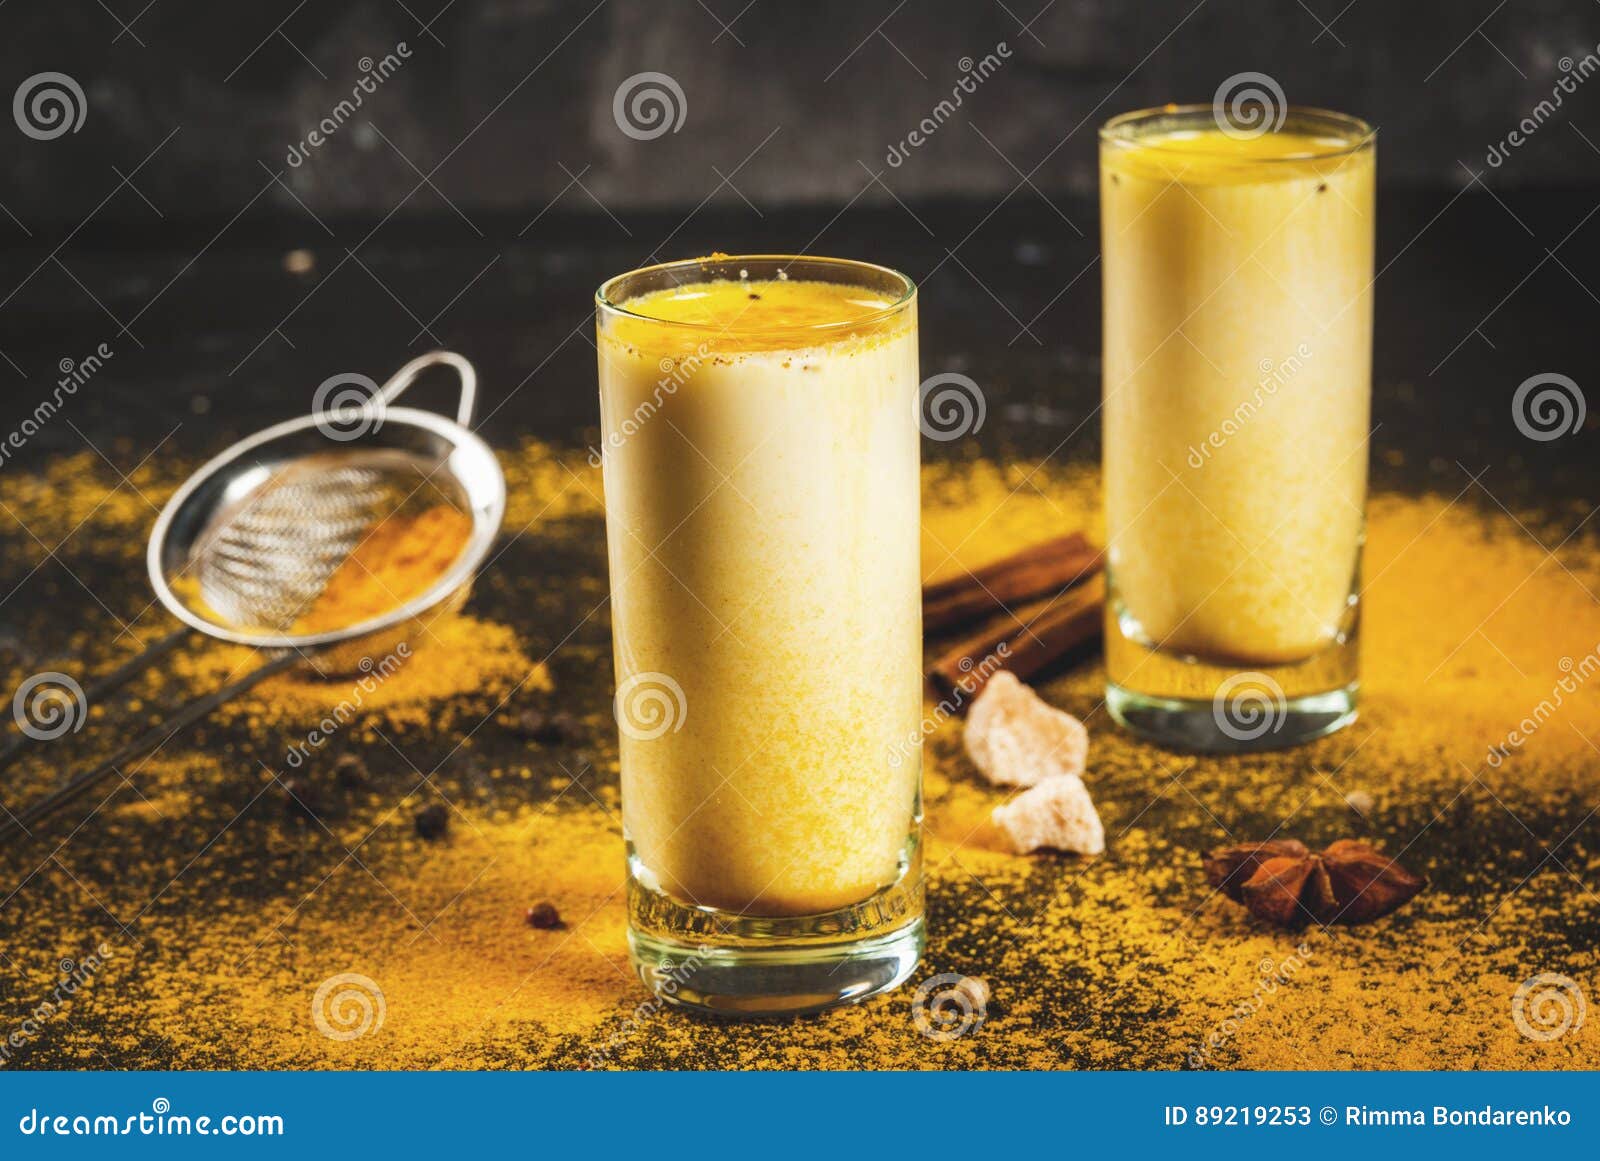 Traditional Indian Drink Turmeric Milk Stock Image - Image of drinks ...